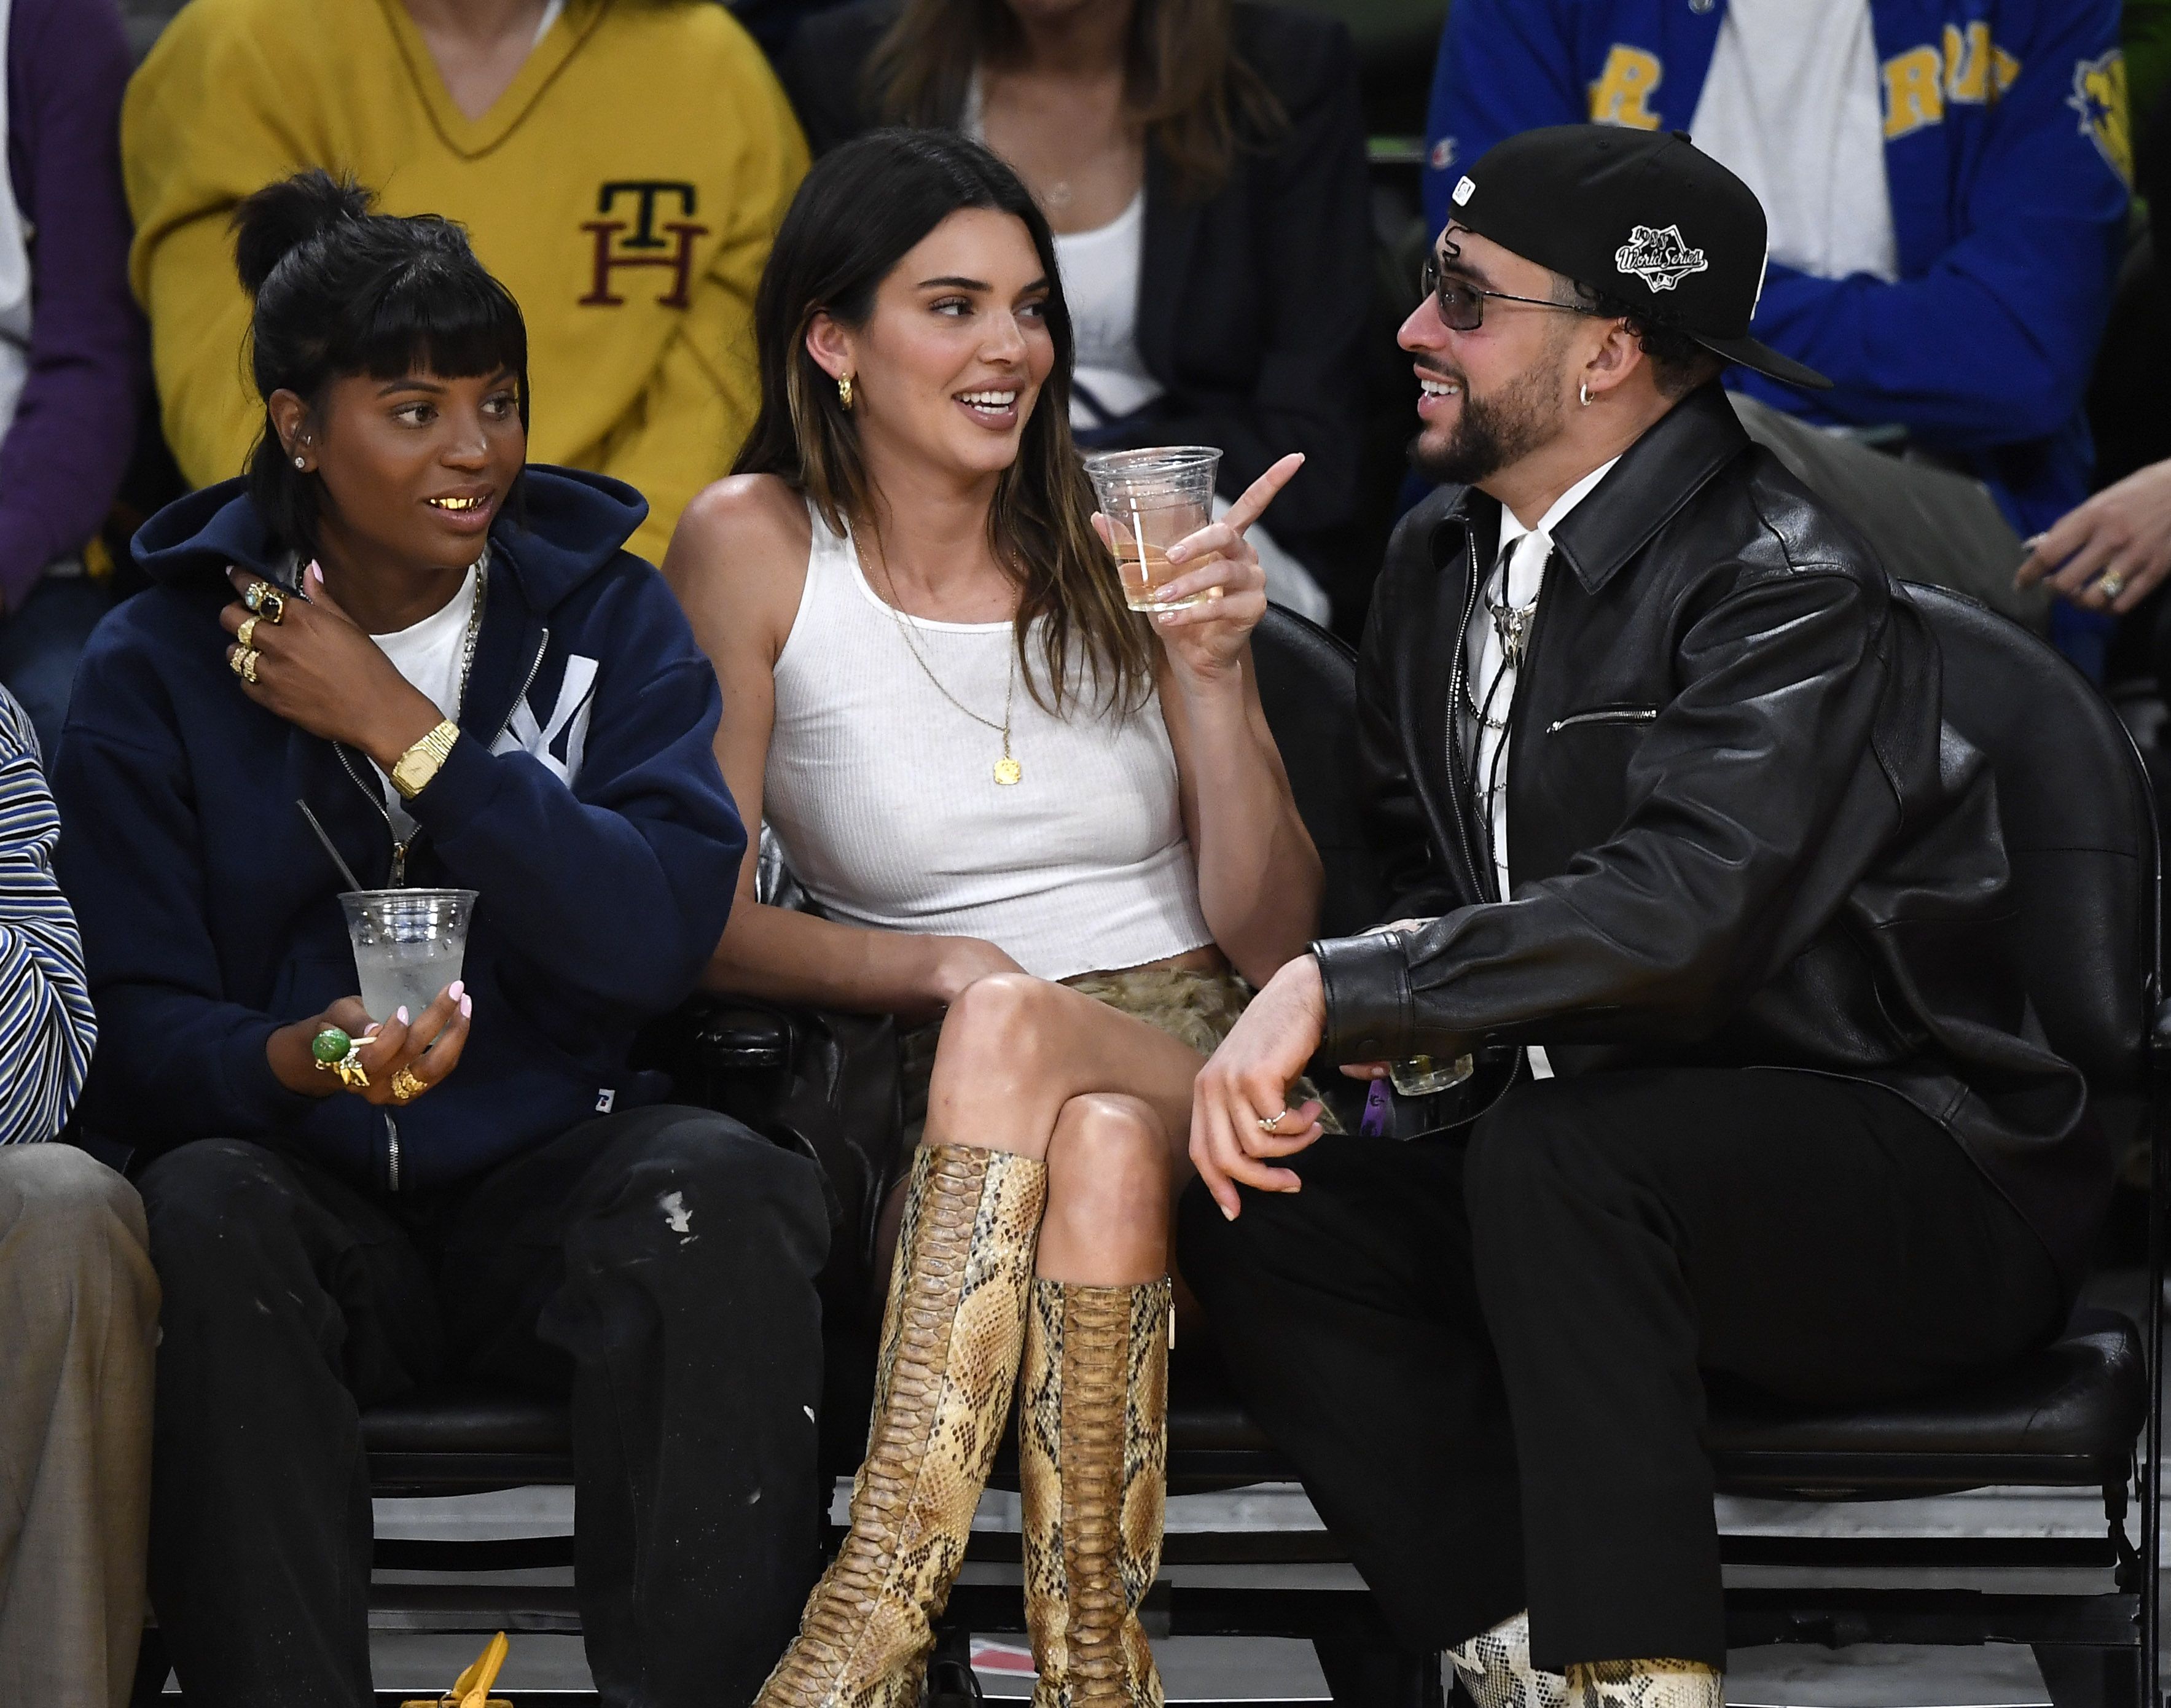 Kendall Jenner and Bad Bunny Seen On Date at the Lakers Game - ReportWire